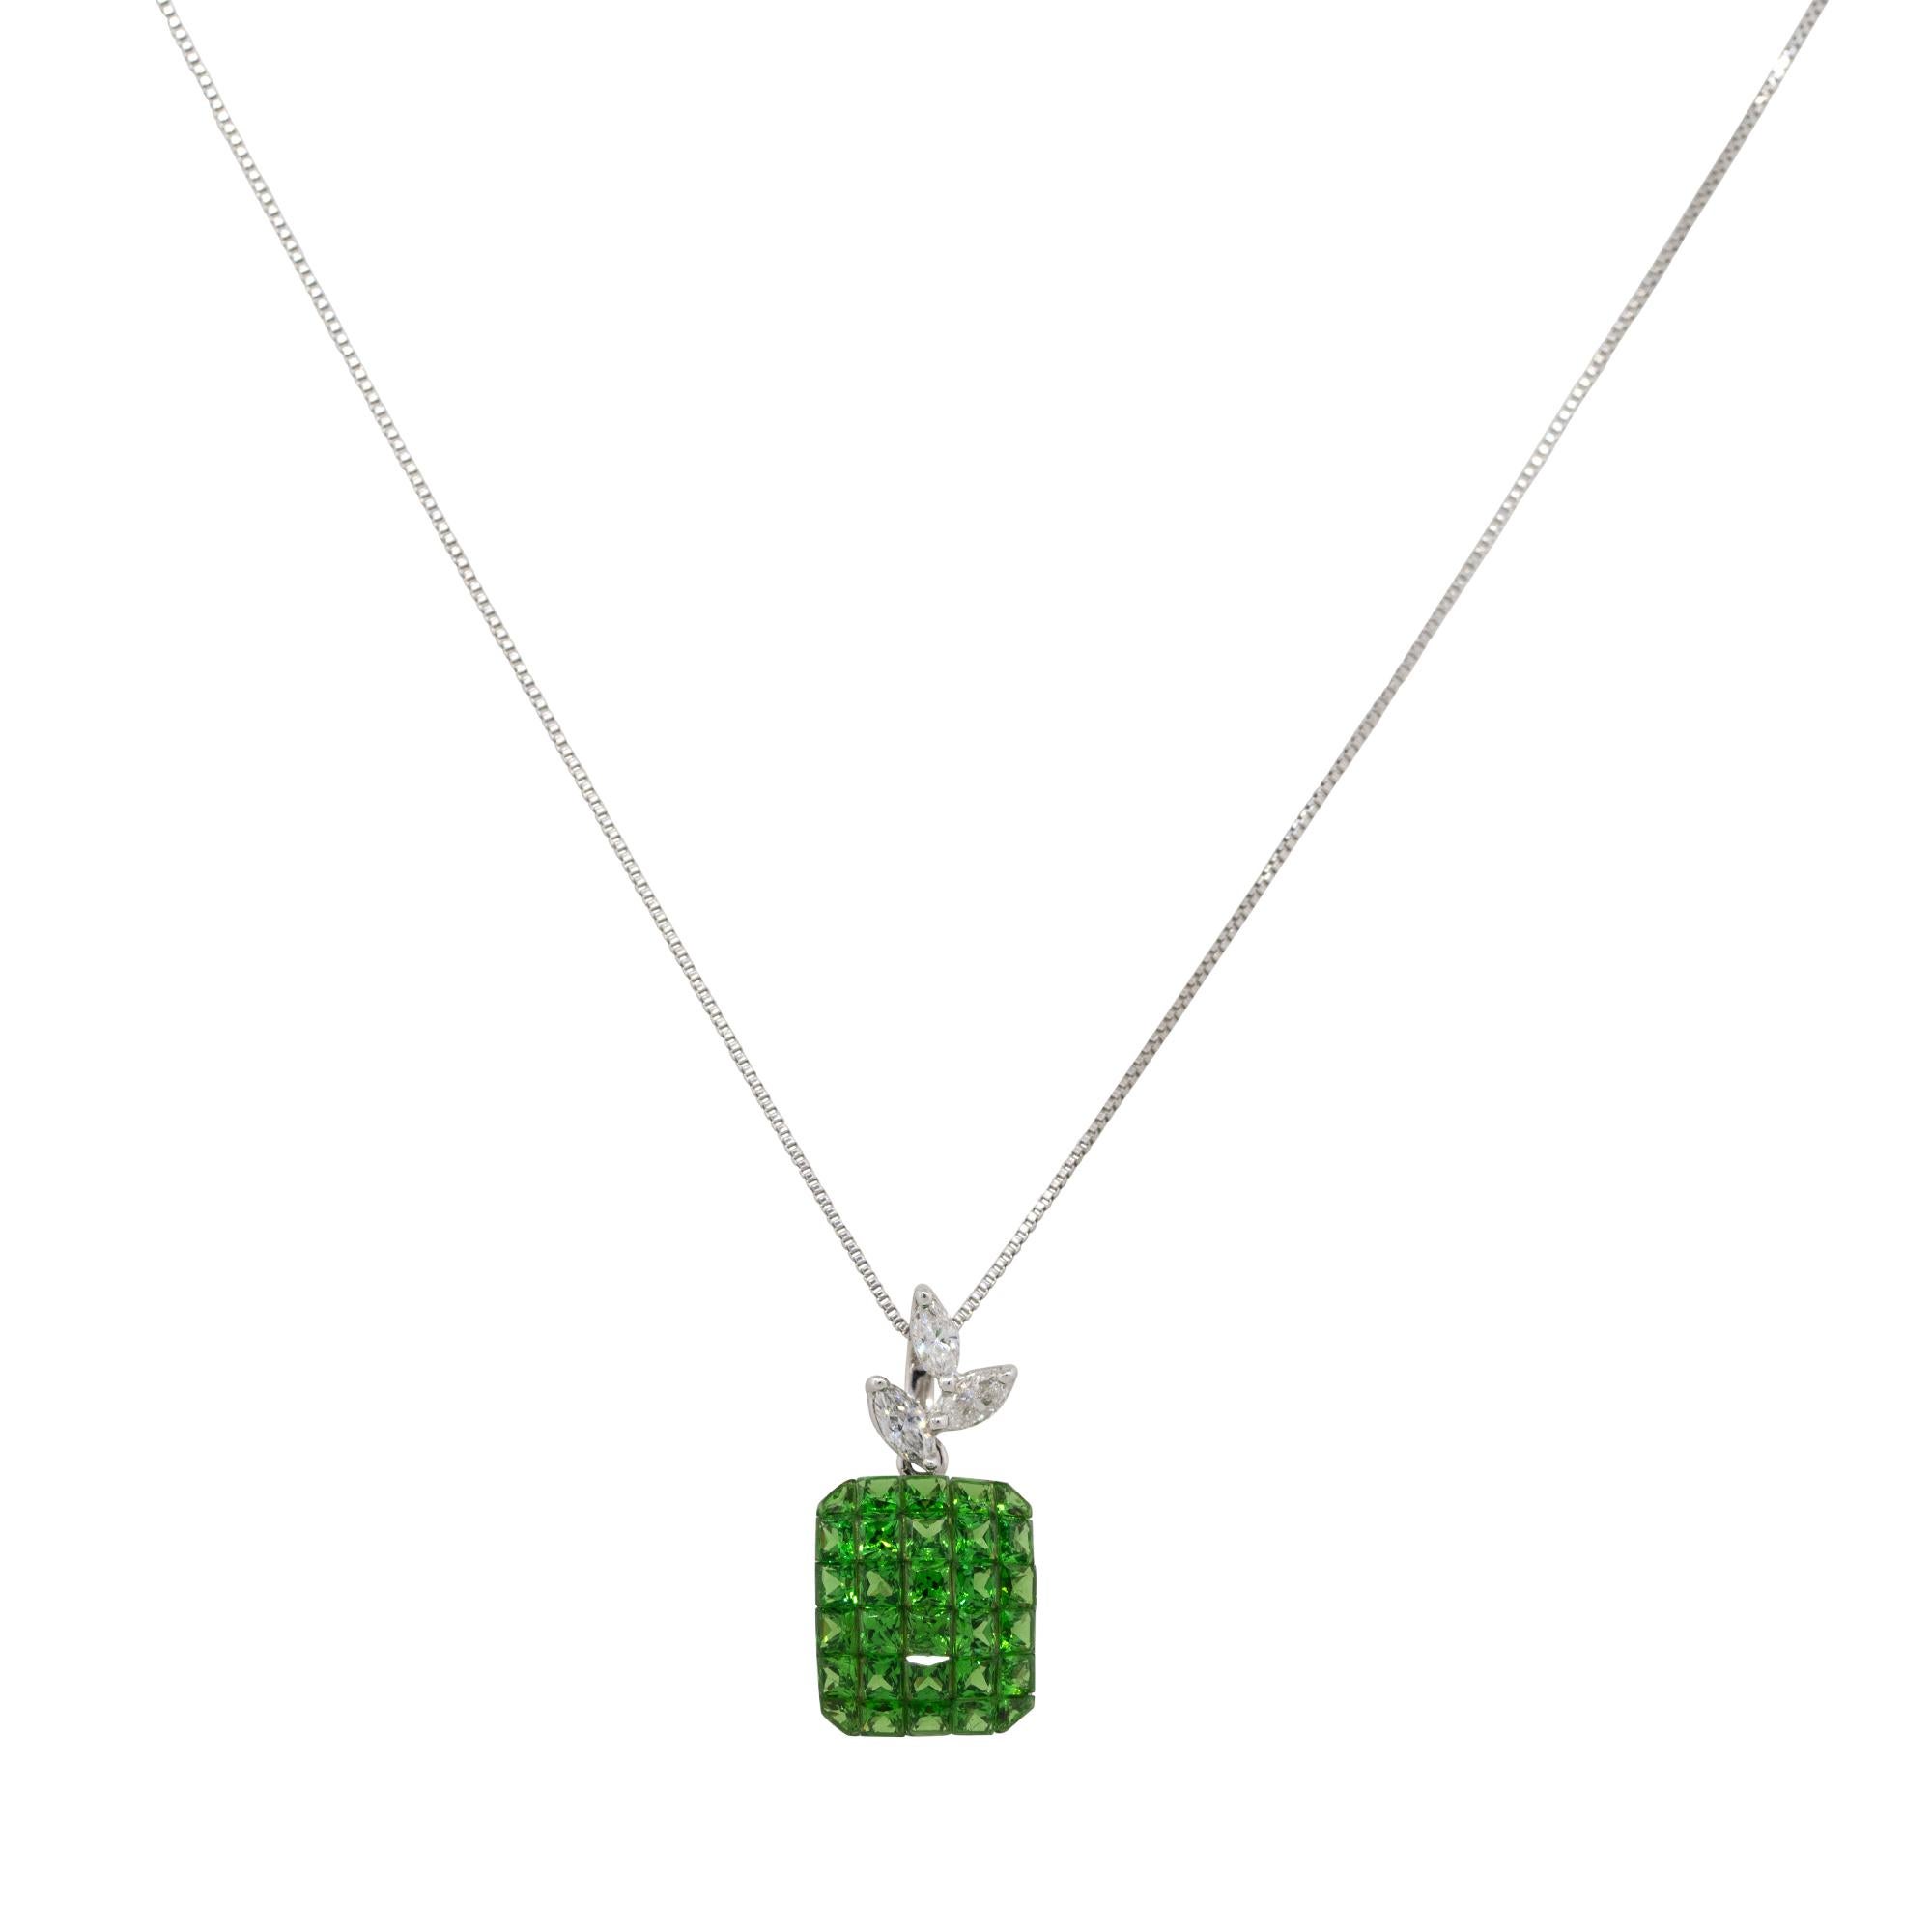 Material: 18k white gold
Diamond Details: Approx. 0.20ctw of round cut Diamonds. Diamonds are G/H in color and VS in clarity
Gemstone Details: Approx. 2.62ctw of green Garnet gemstones
Clasps: Lobster clasp
Total Weight: 3.5g (2.3dwt) 
Pendant